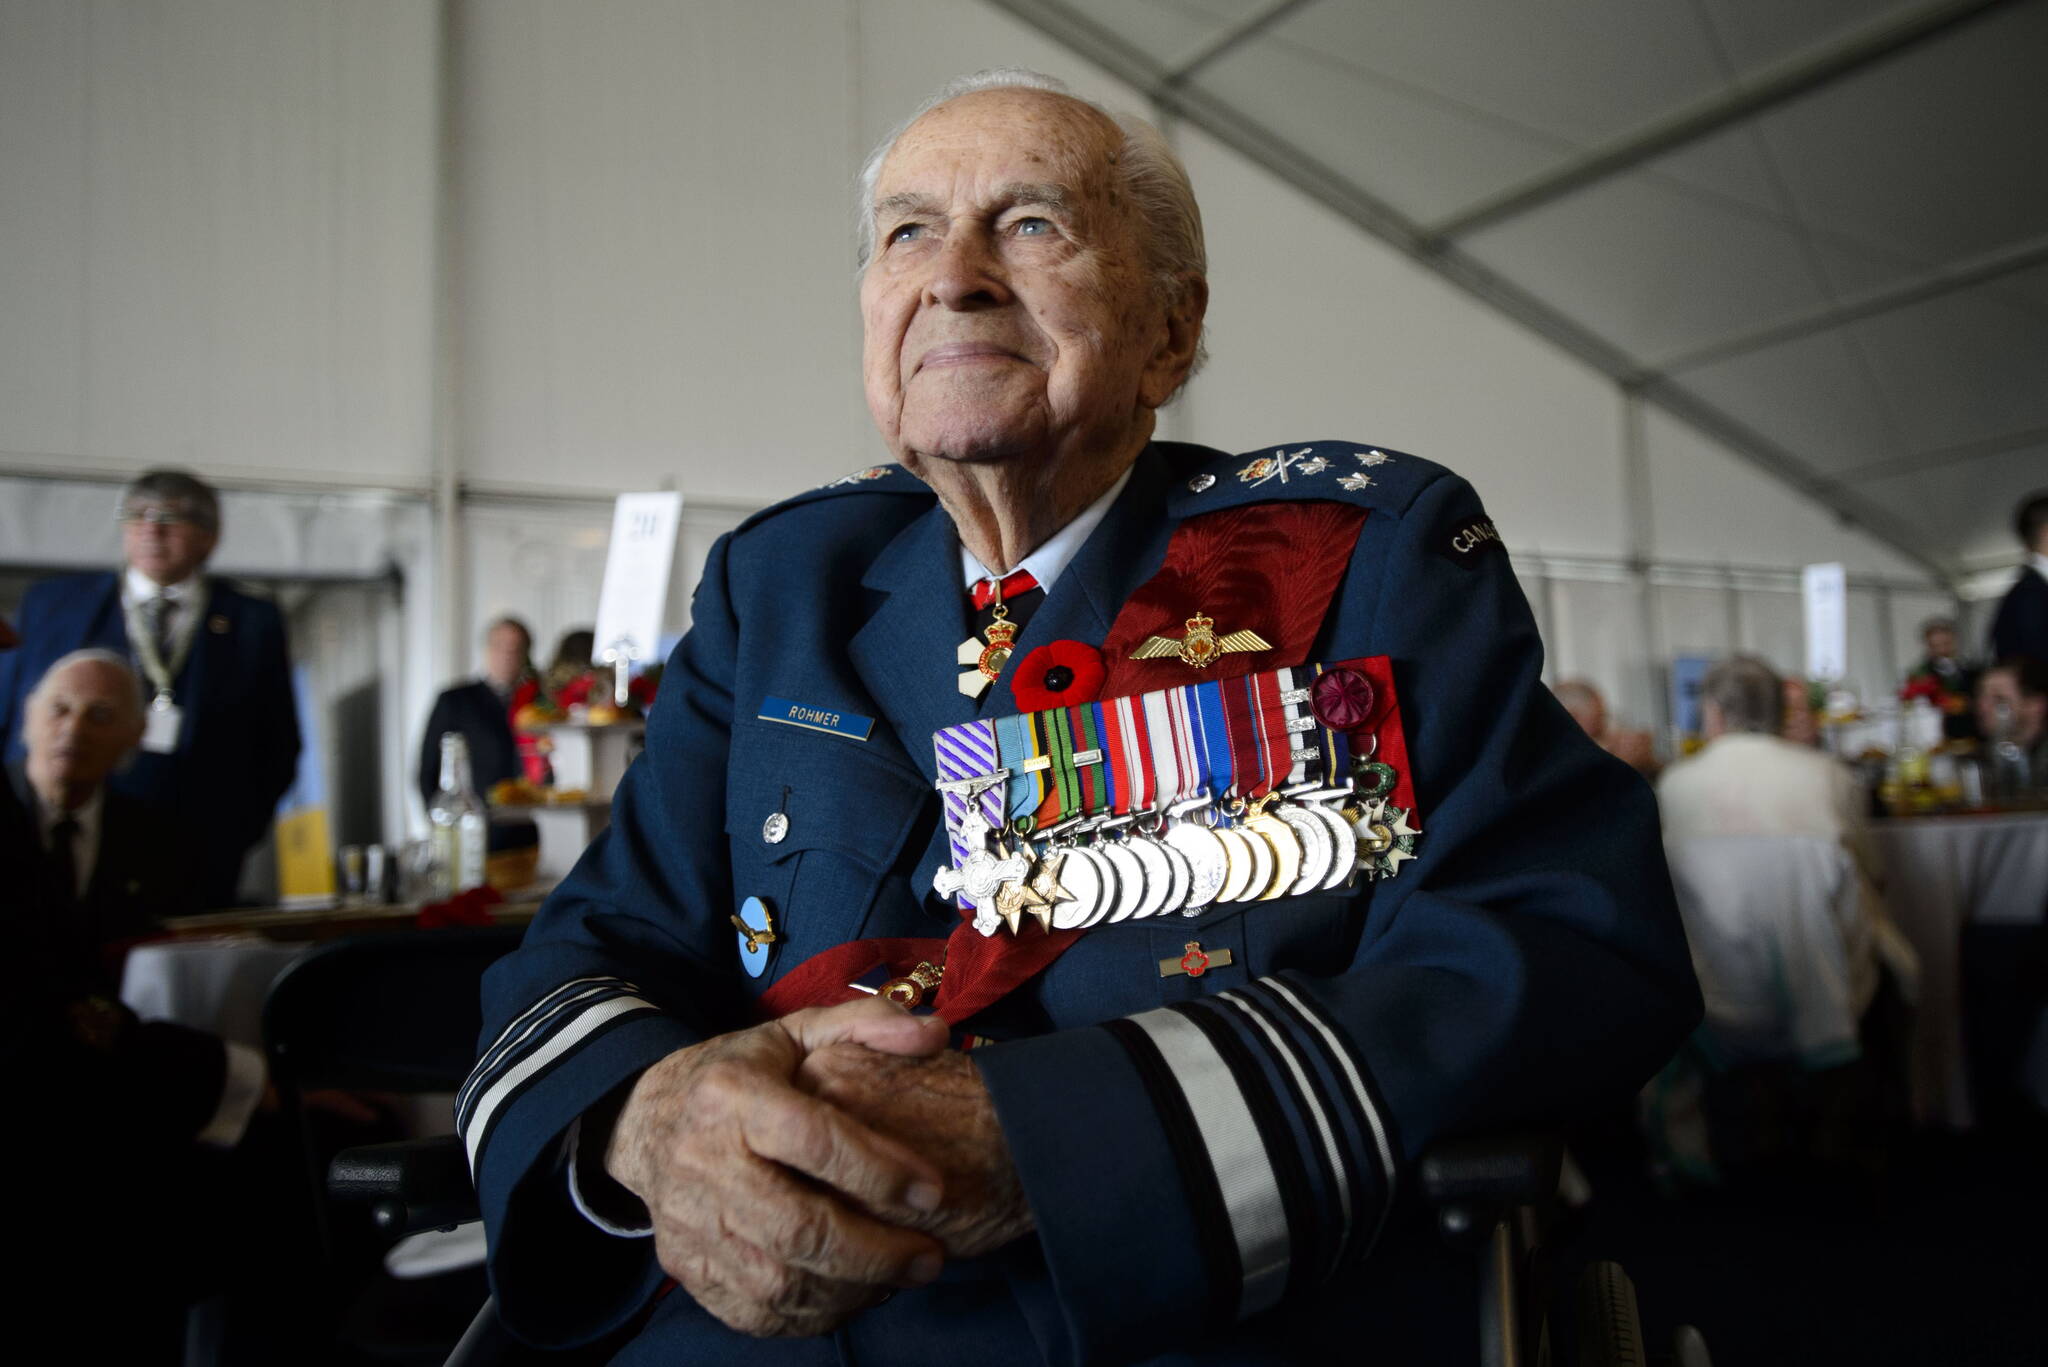 Canadian Lt.-Gen. Richard Rohmer takes part in the veterans reception as part of the D-Day 75th Anniversary British International Commemorative Event at Southsea Common in Portsmouth, England on Wednesday, June 5, 2019. THE CANADIAN PRESS/Sean Kilpatrick